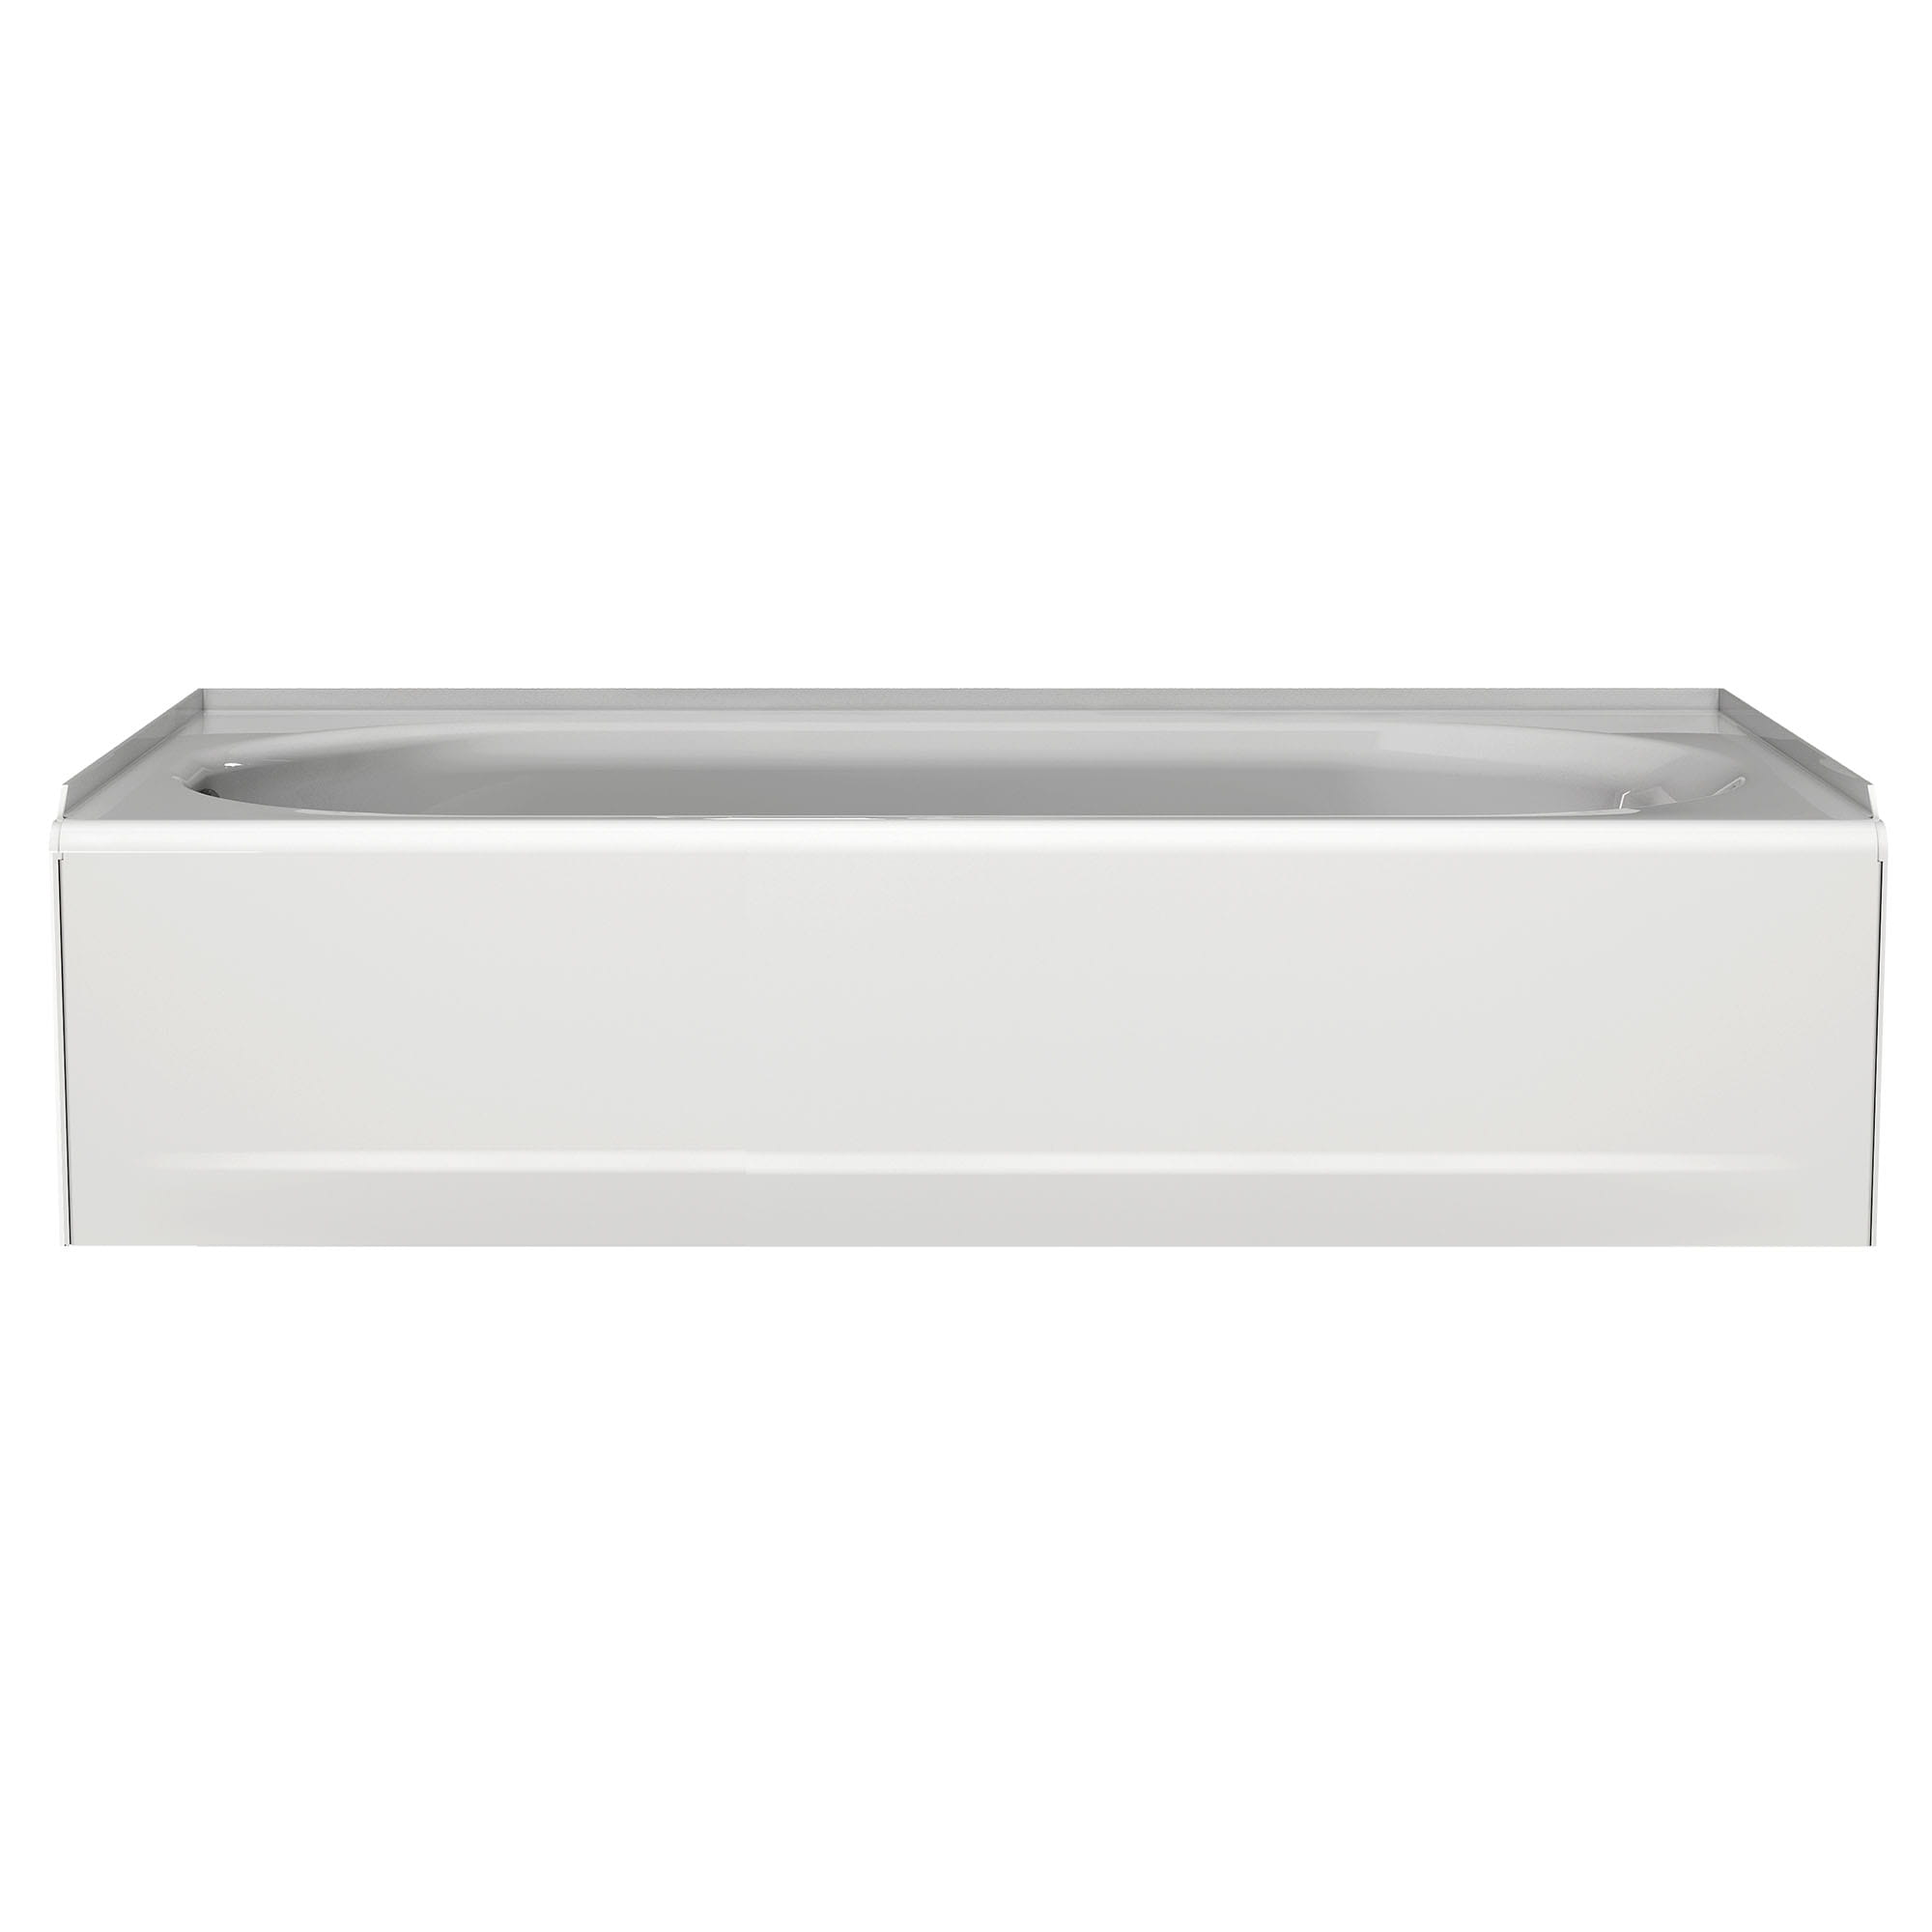 Princeton® Americast® 60 x 30-Inch Integral Apron Bathtub Left-Hand Outlet With Integral Drain